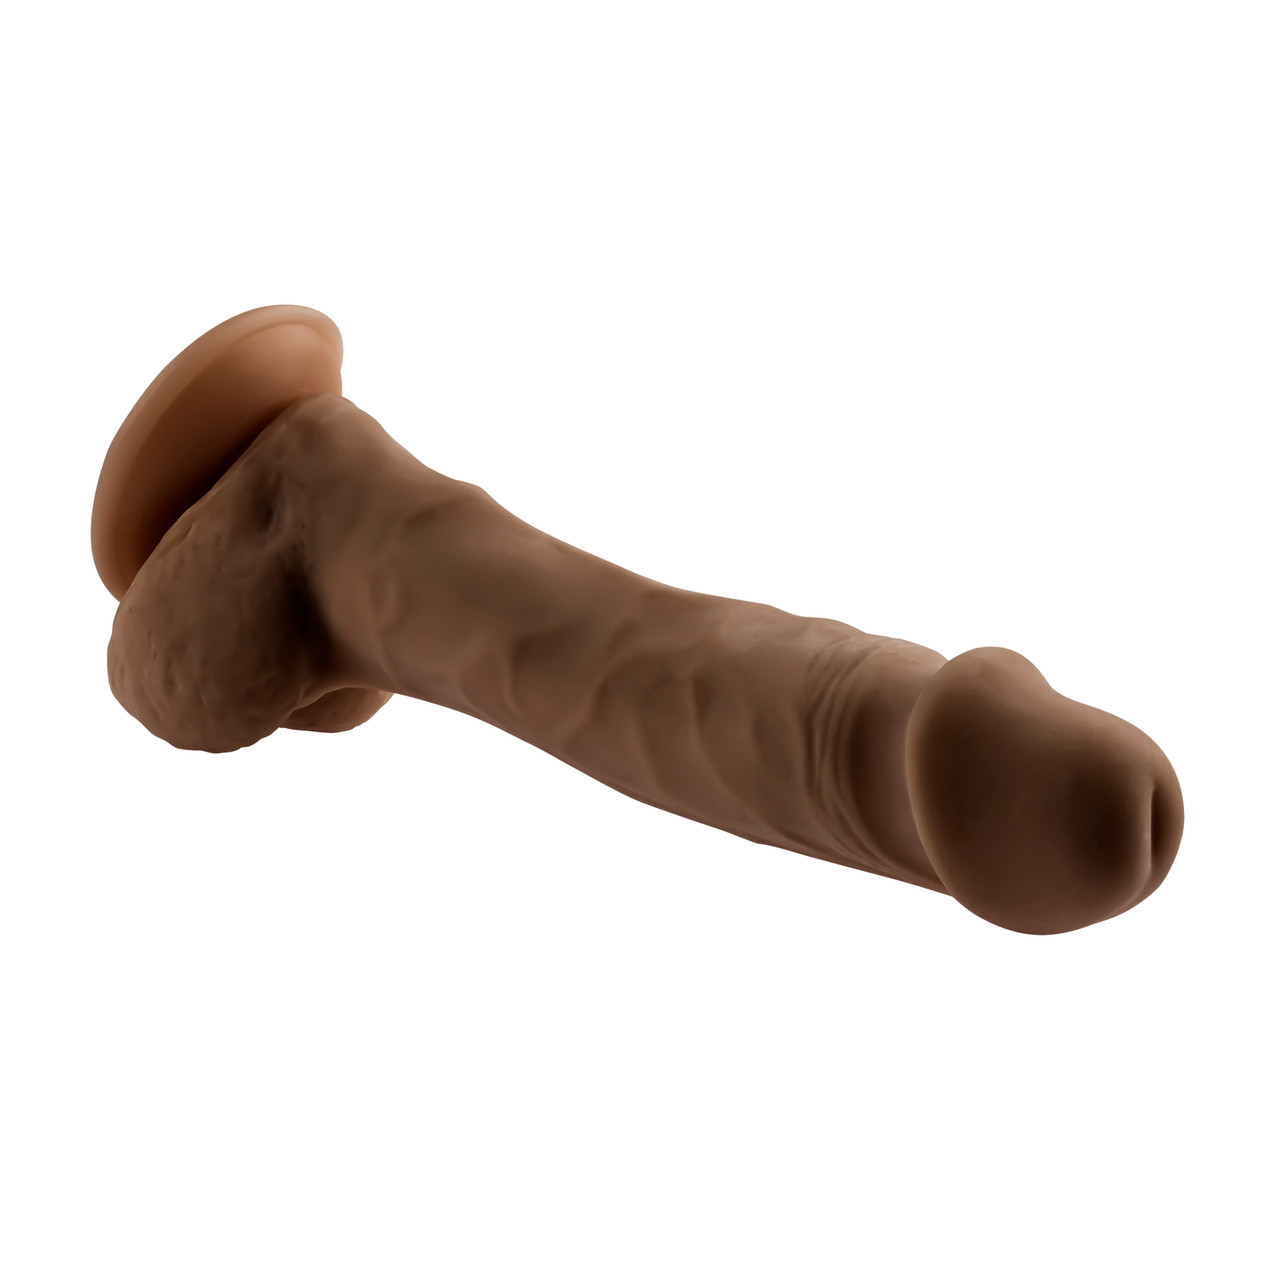 Natural Feel 6.5 inch Dildo | Buy realistic dildos online from Condom Depot